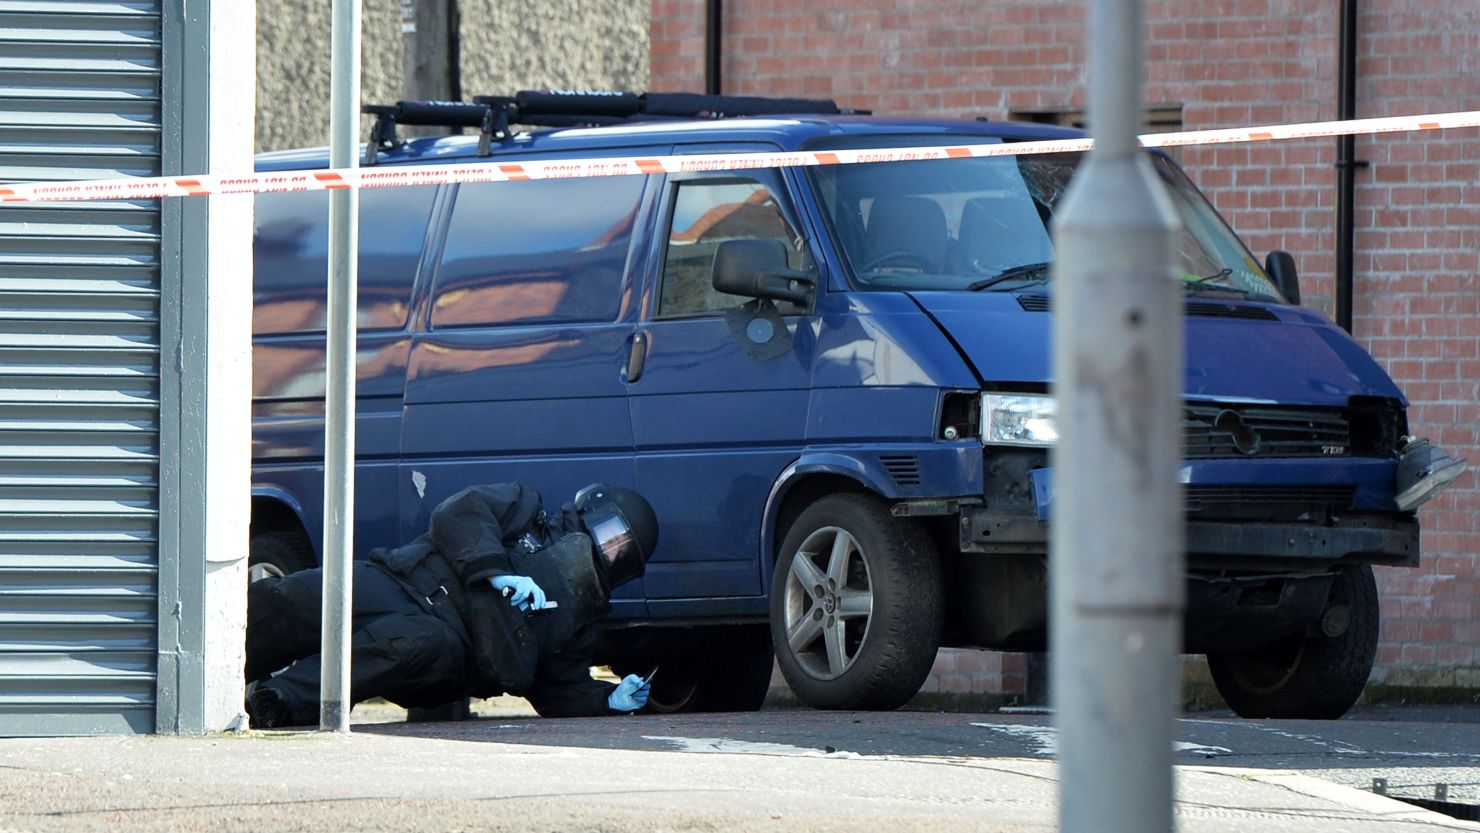 A bomb disposal unit officer checks a van damaged in a car bomb attack Friday in Belfast.